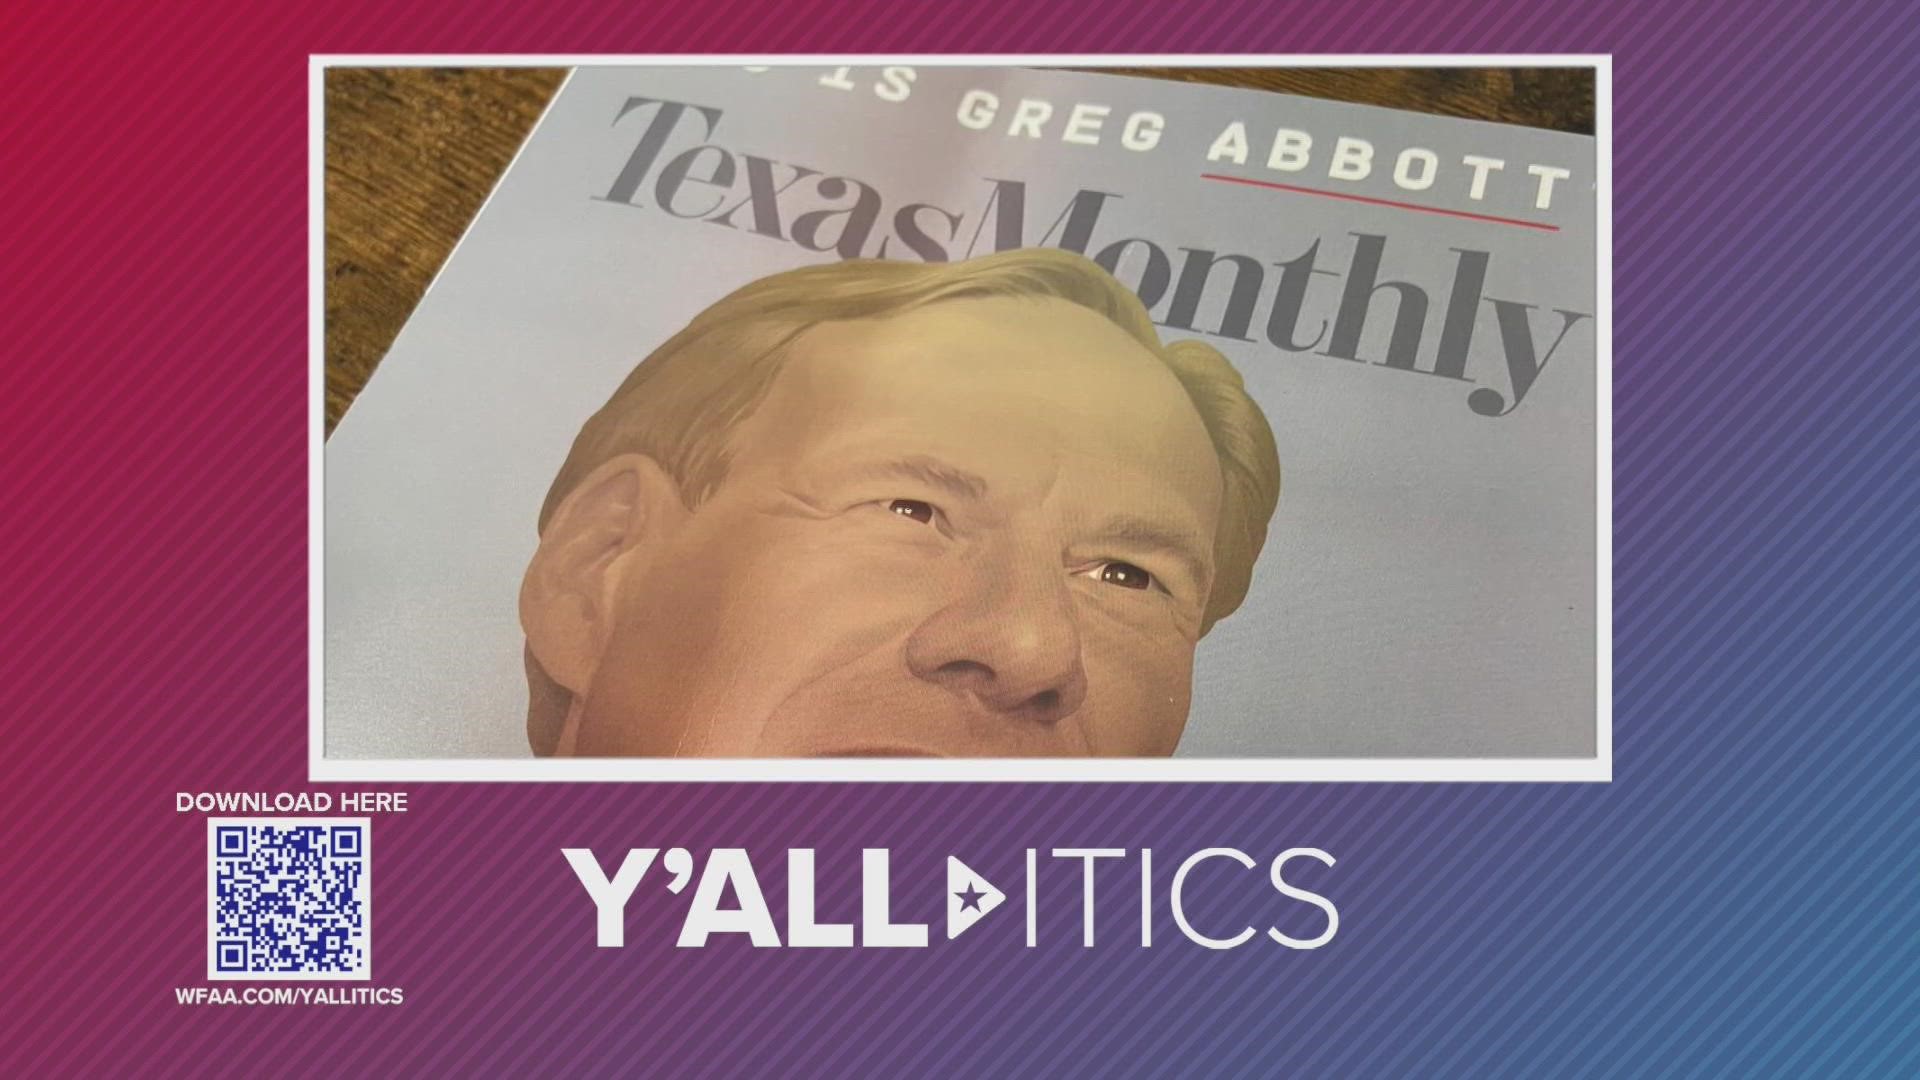 How much do Texans know about their 48th governor?